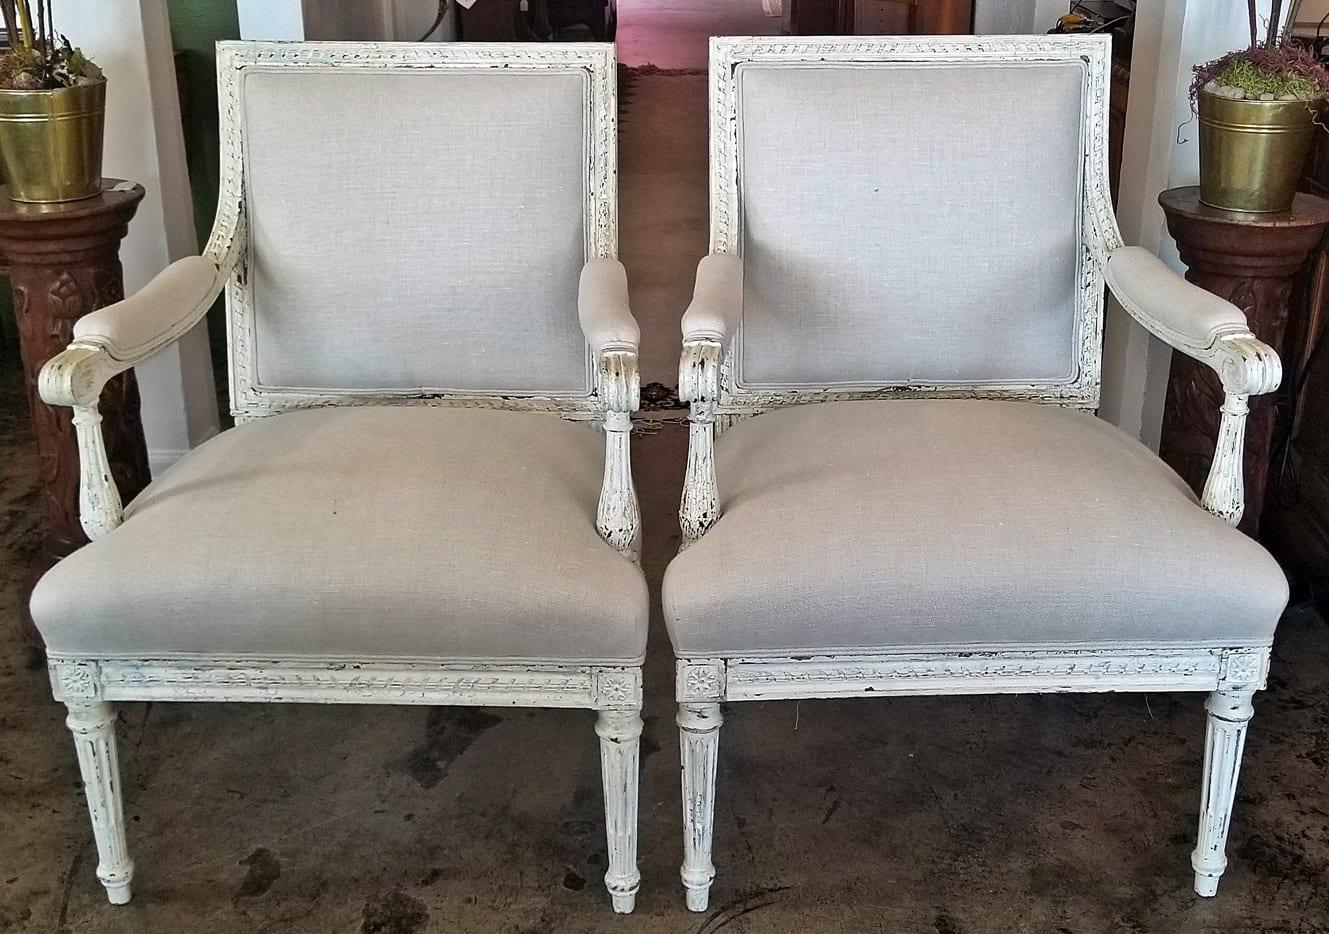 Hand-Painted 19th Century Pair of French Louis XVI Style Painted Armchairs